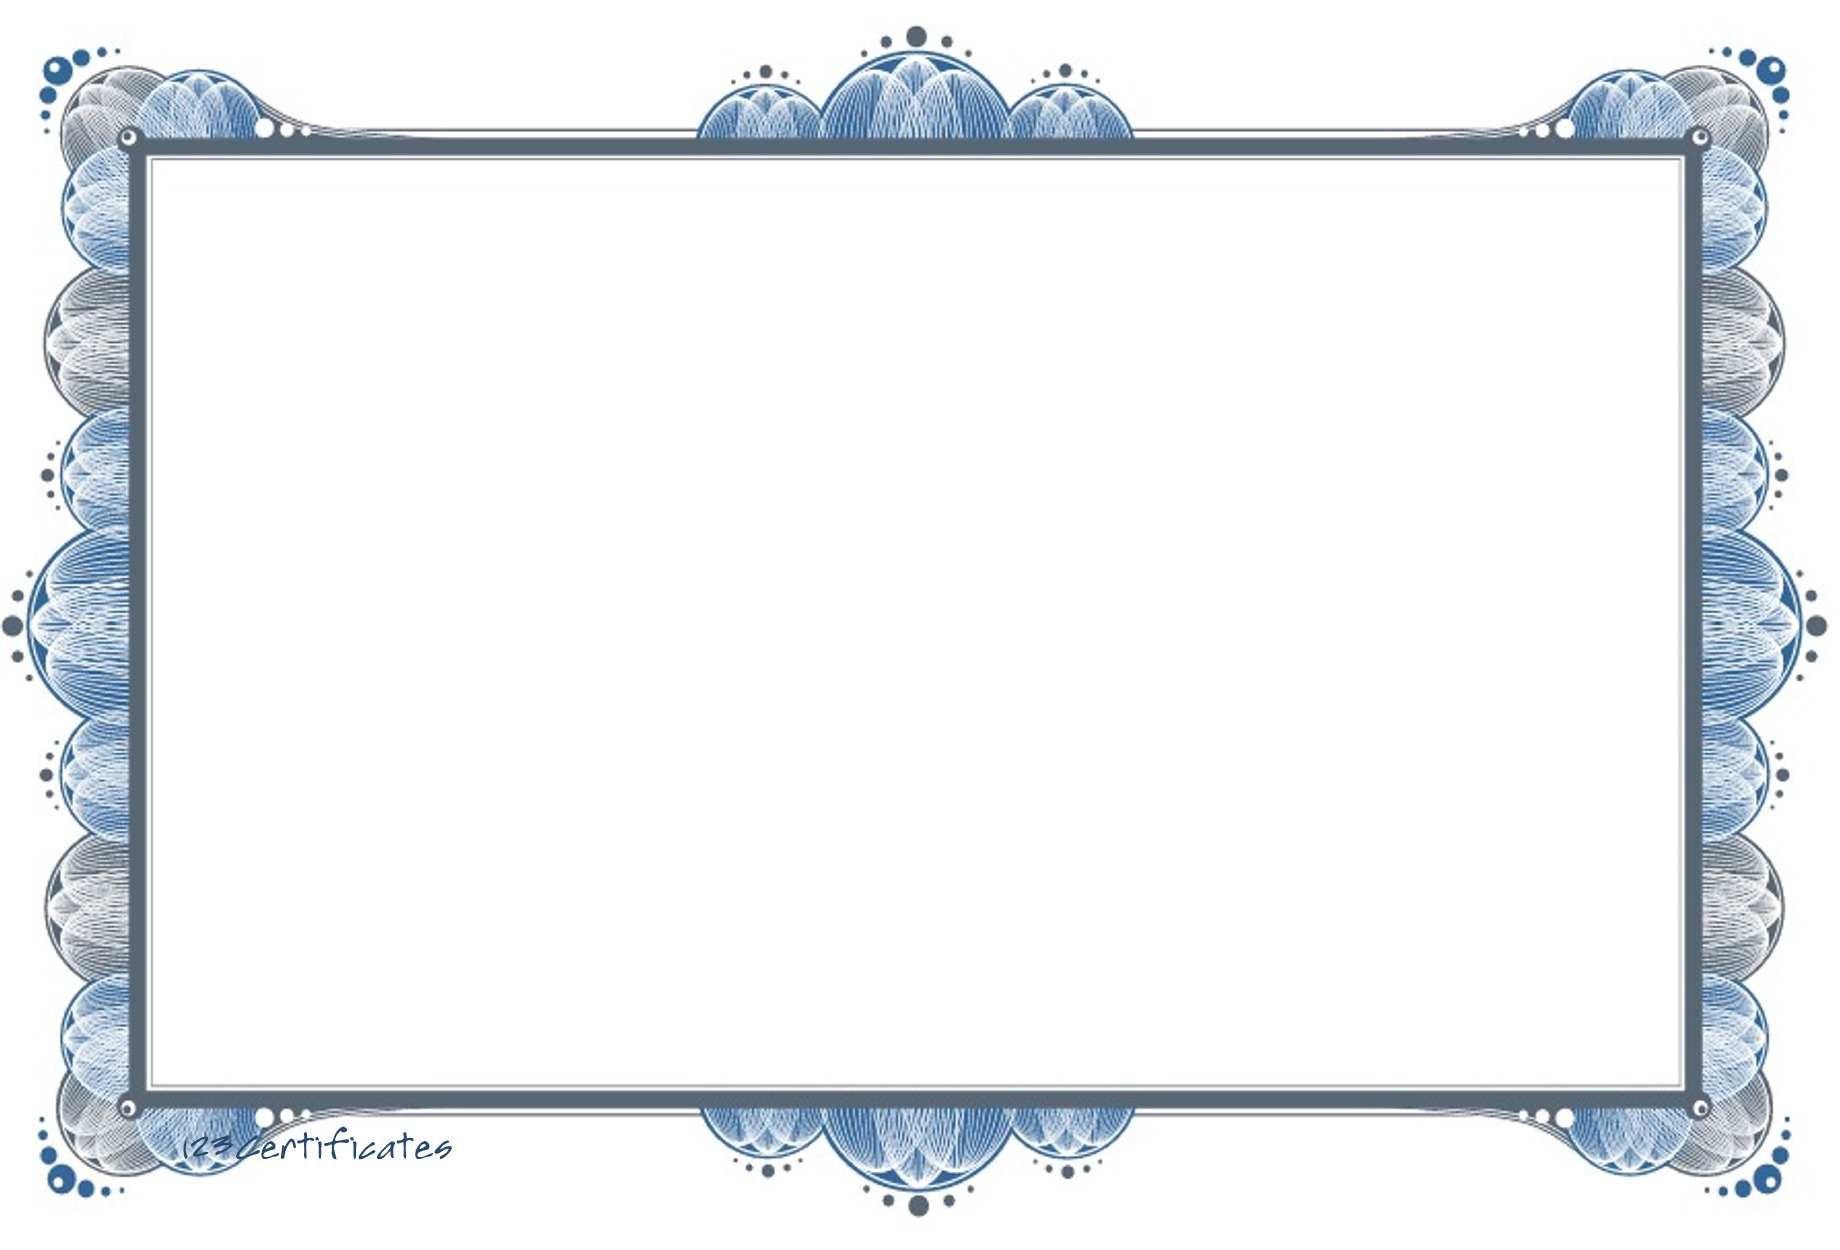 Free Certificate Border, Download Free Clip Art, Free Clip Throughout Word Border Templates Free Download